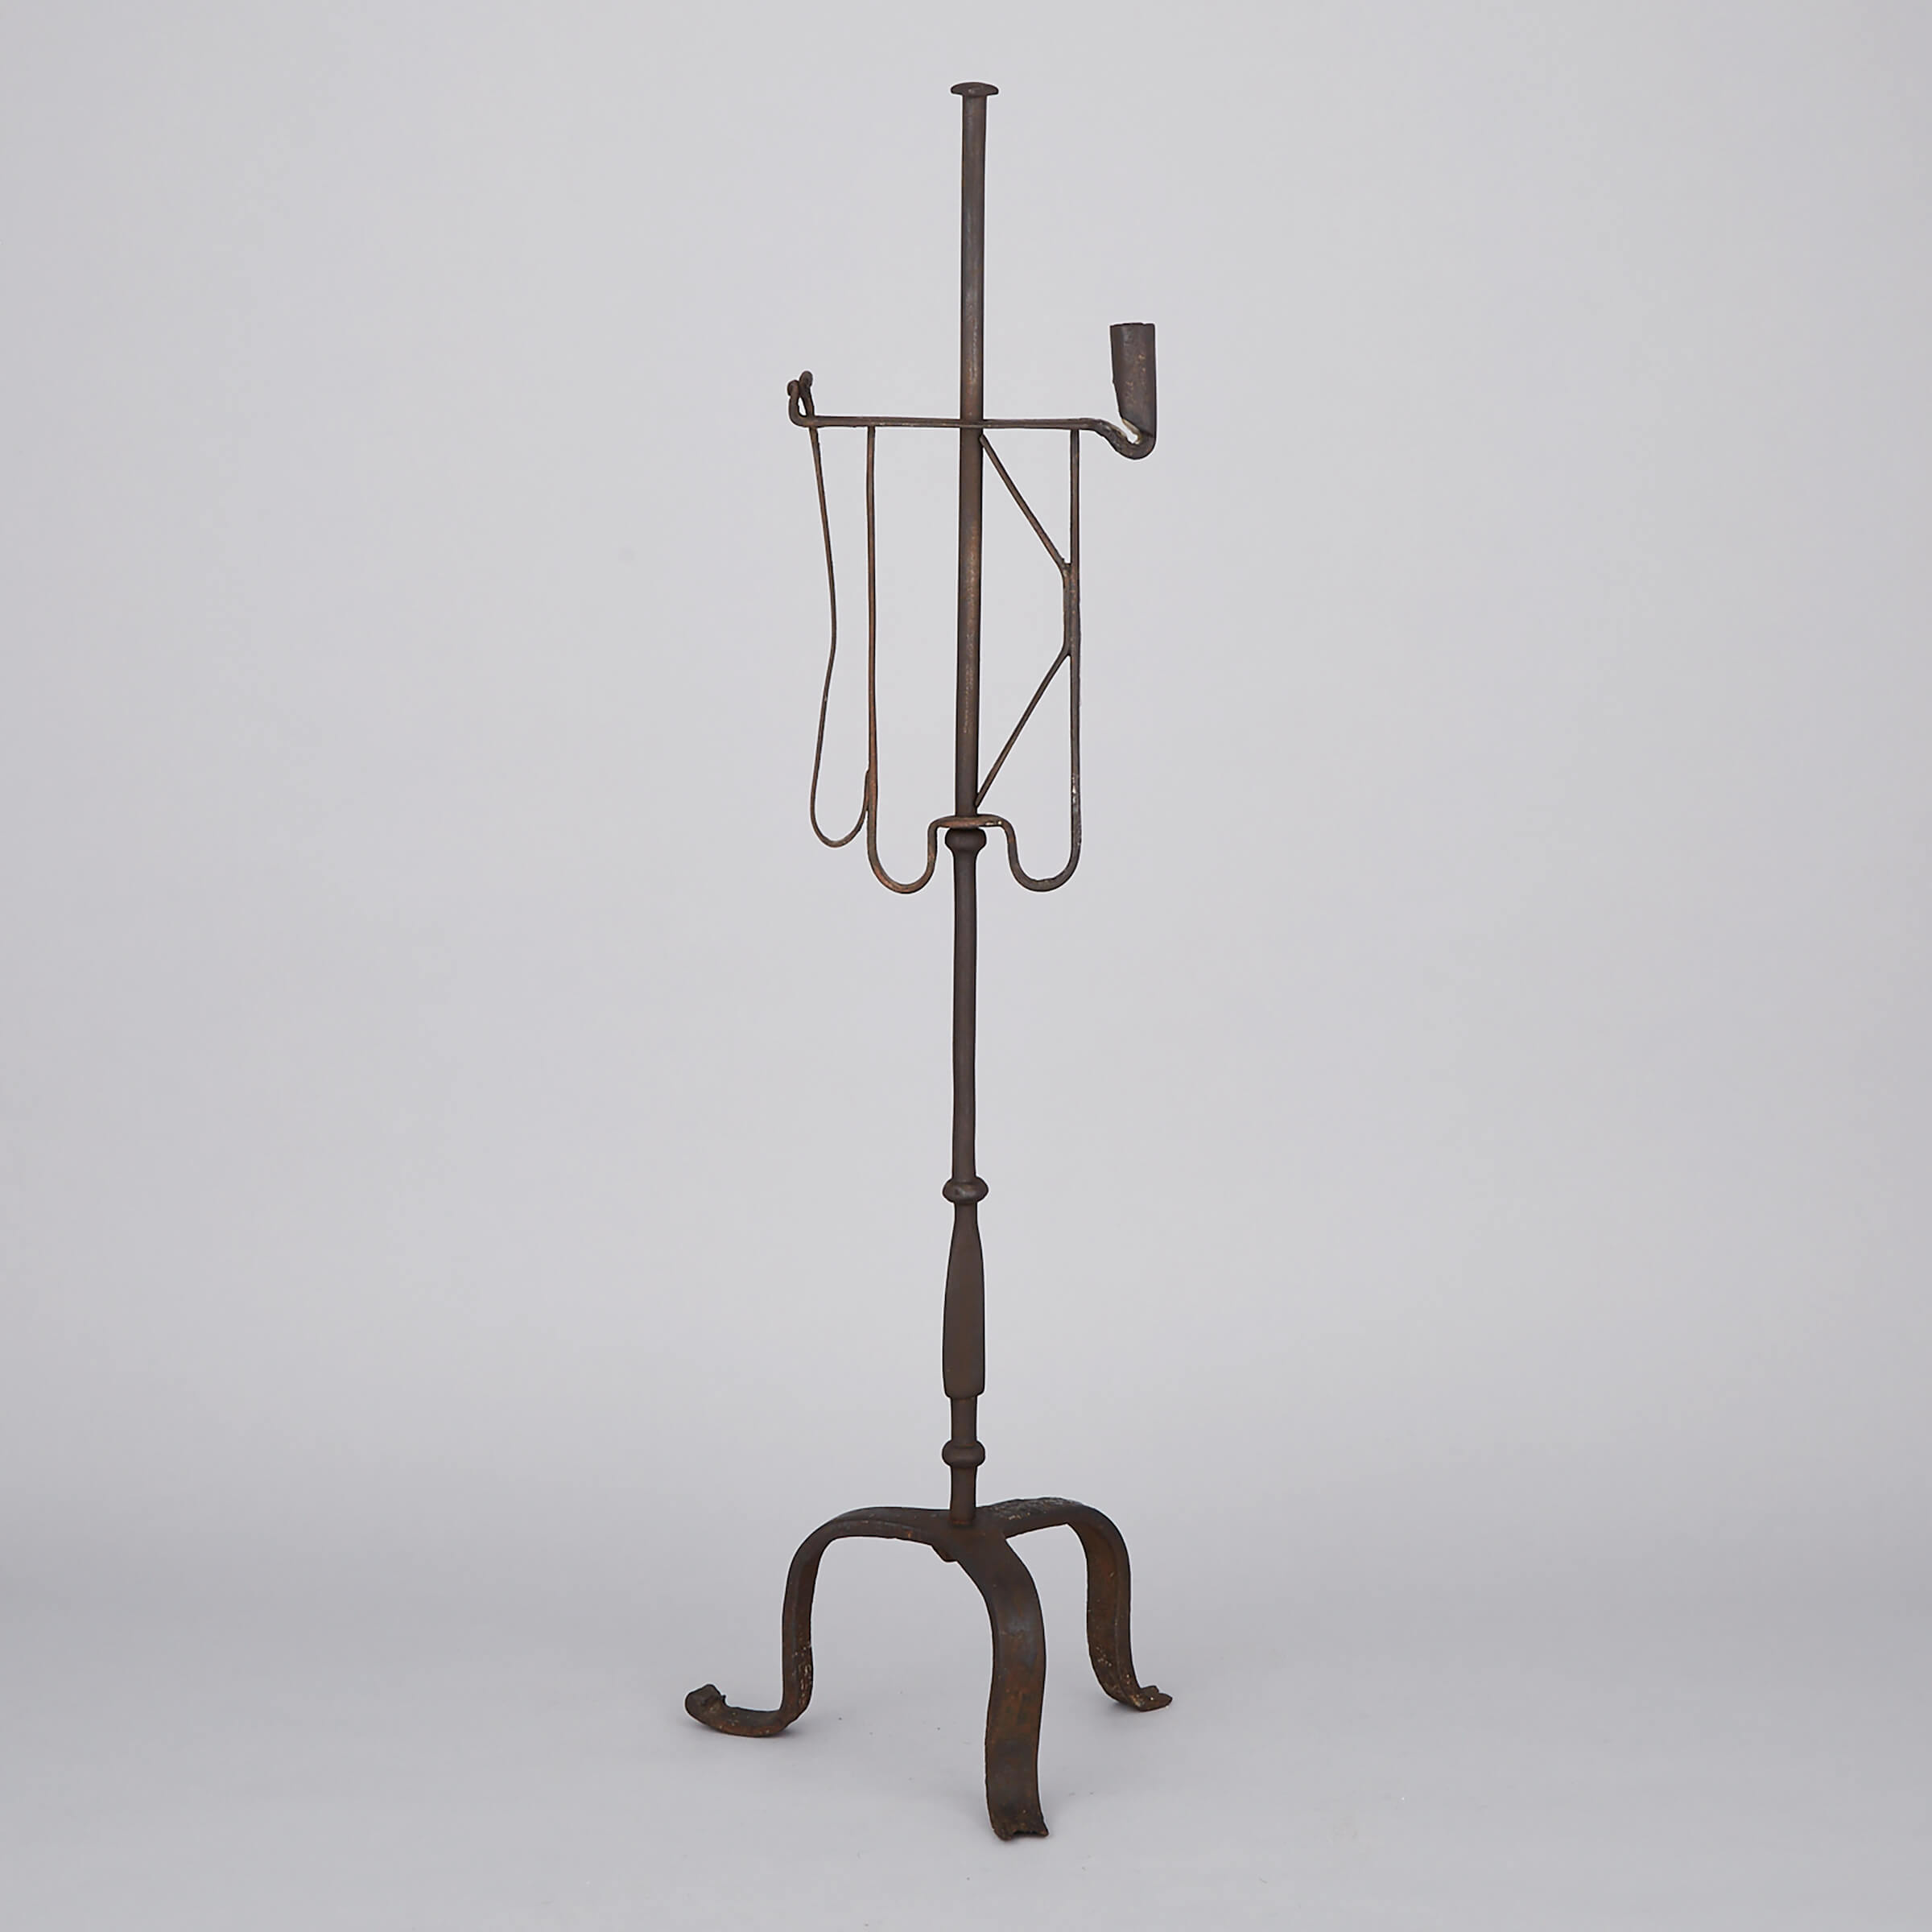 English Wrought Iron Floor Rushnip with Candle Holder, 18th century